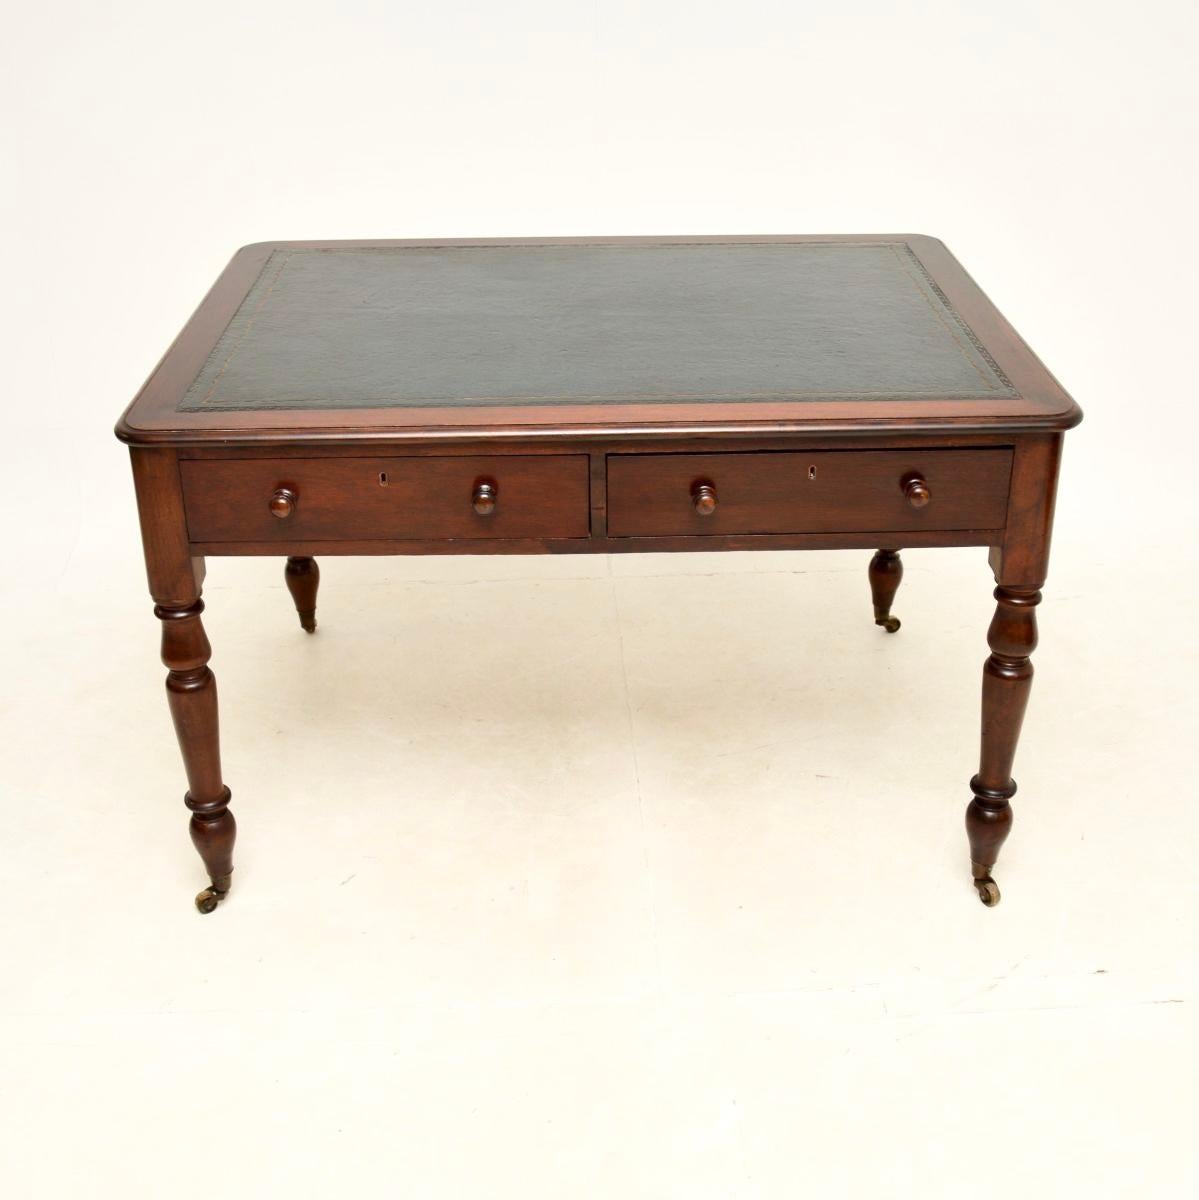 A superb antique Victorian leather top partners desk / writing table. This was made in England, it dates from around the 1860-1880 period.

It is of great quality and is an impressive size with plenty of work space. The top is inset leather with